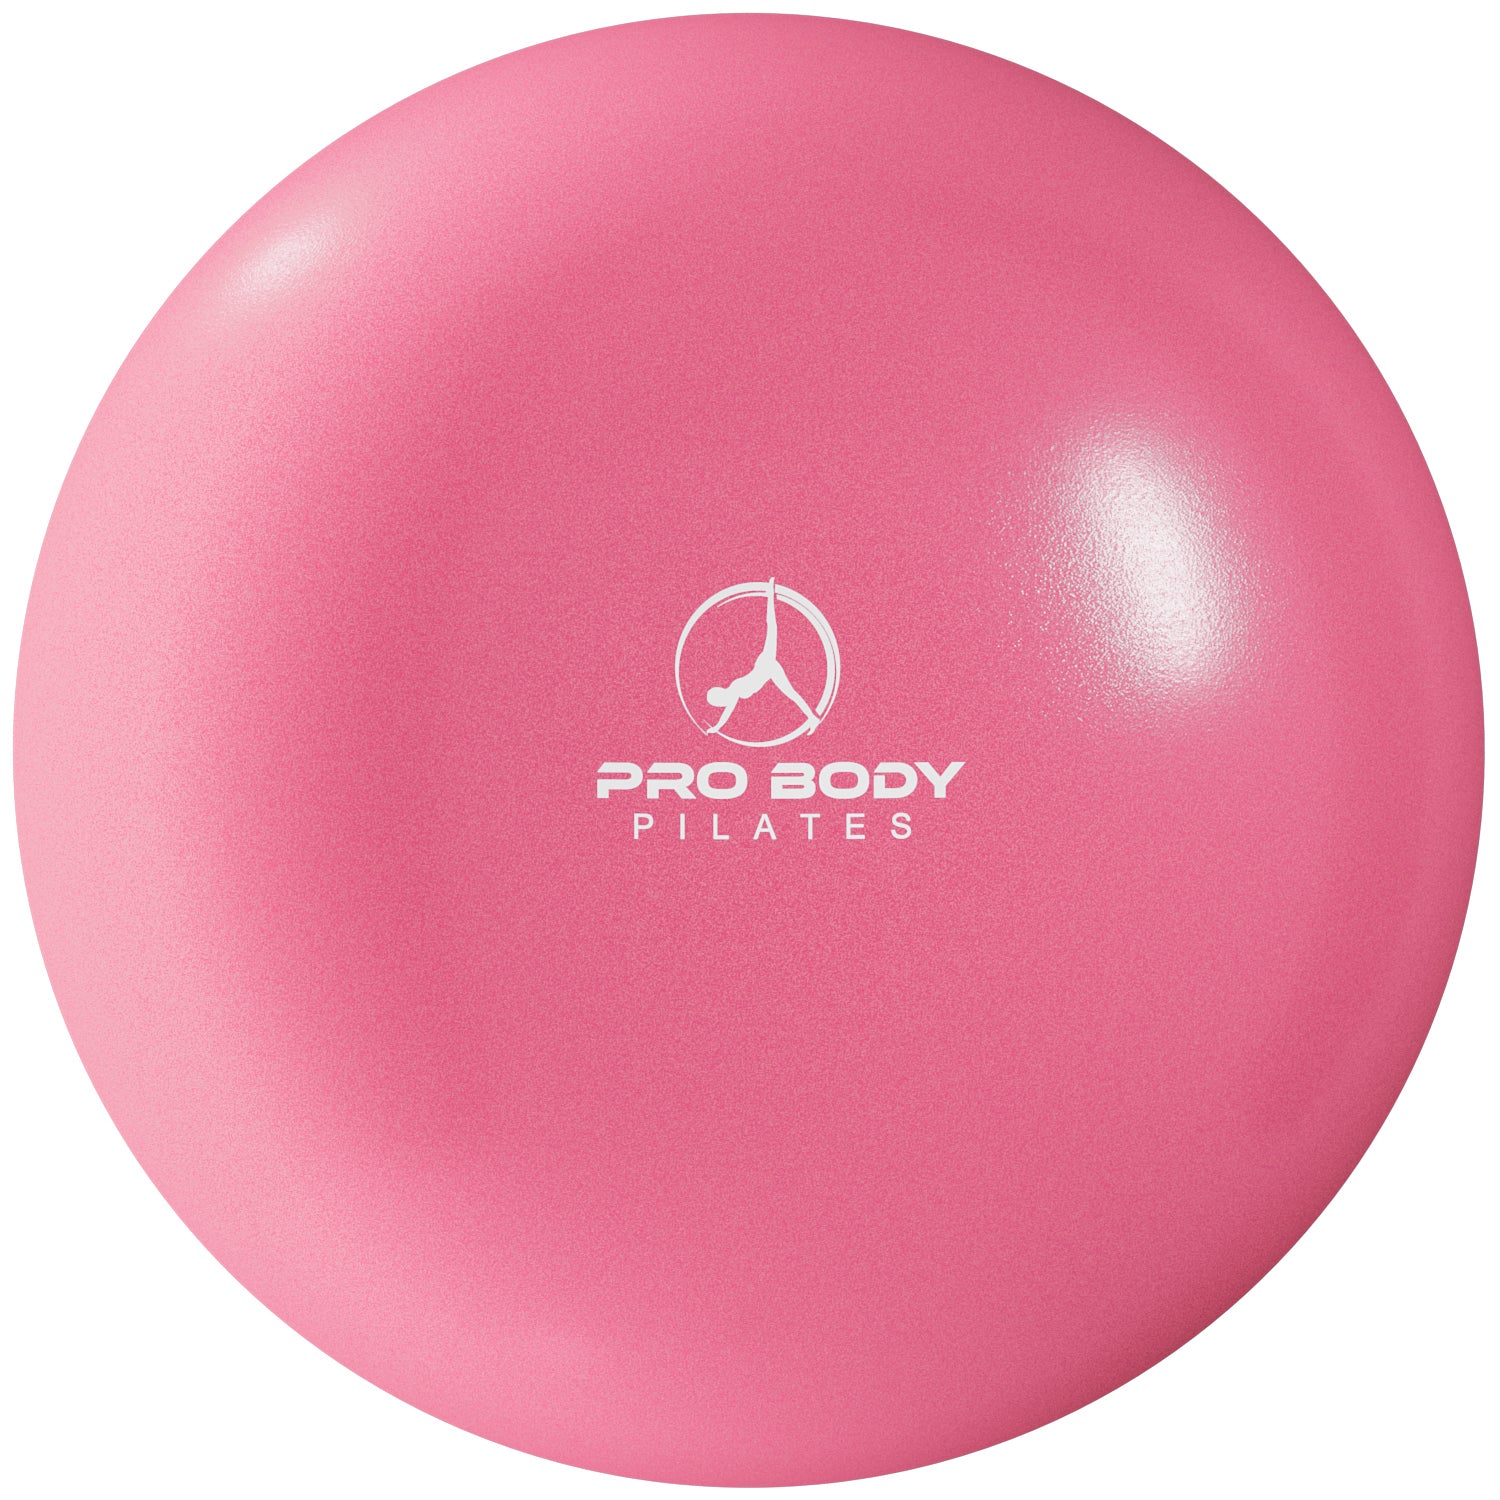 Vaupan Mini Exercise Ball, 9 inch Small Gym Ball with Inflatable Straw for  Yoga, Pilates, Ballet, Stability, Physical Therapy, Stretching and Core  Training, Improves Balance, Strength (Pink Purple) 